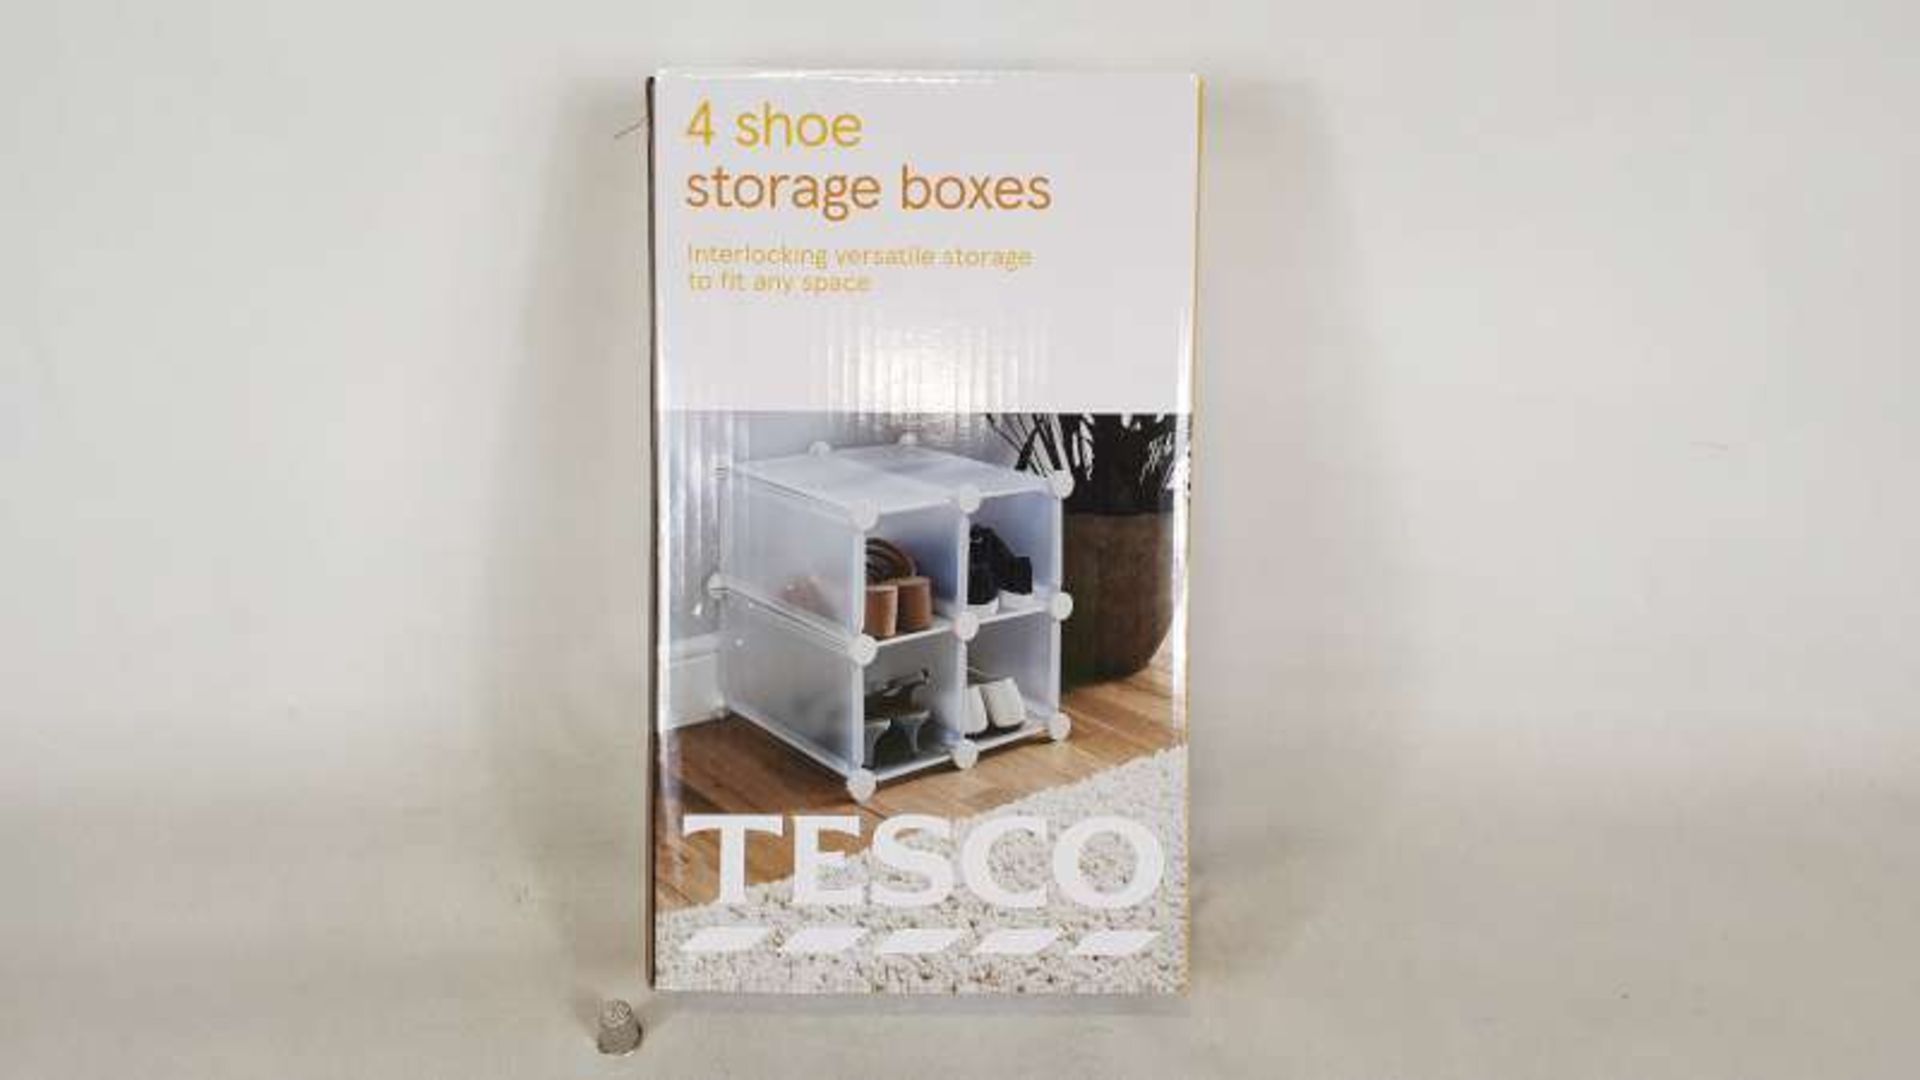 20 X 4 SHOE STORAGE BOXES IN 5 BOXES